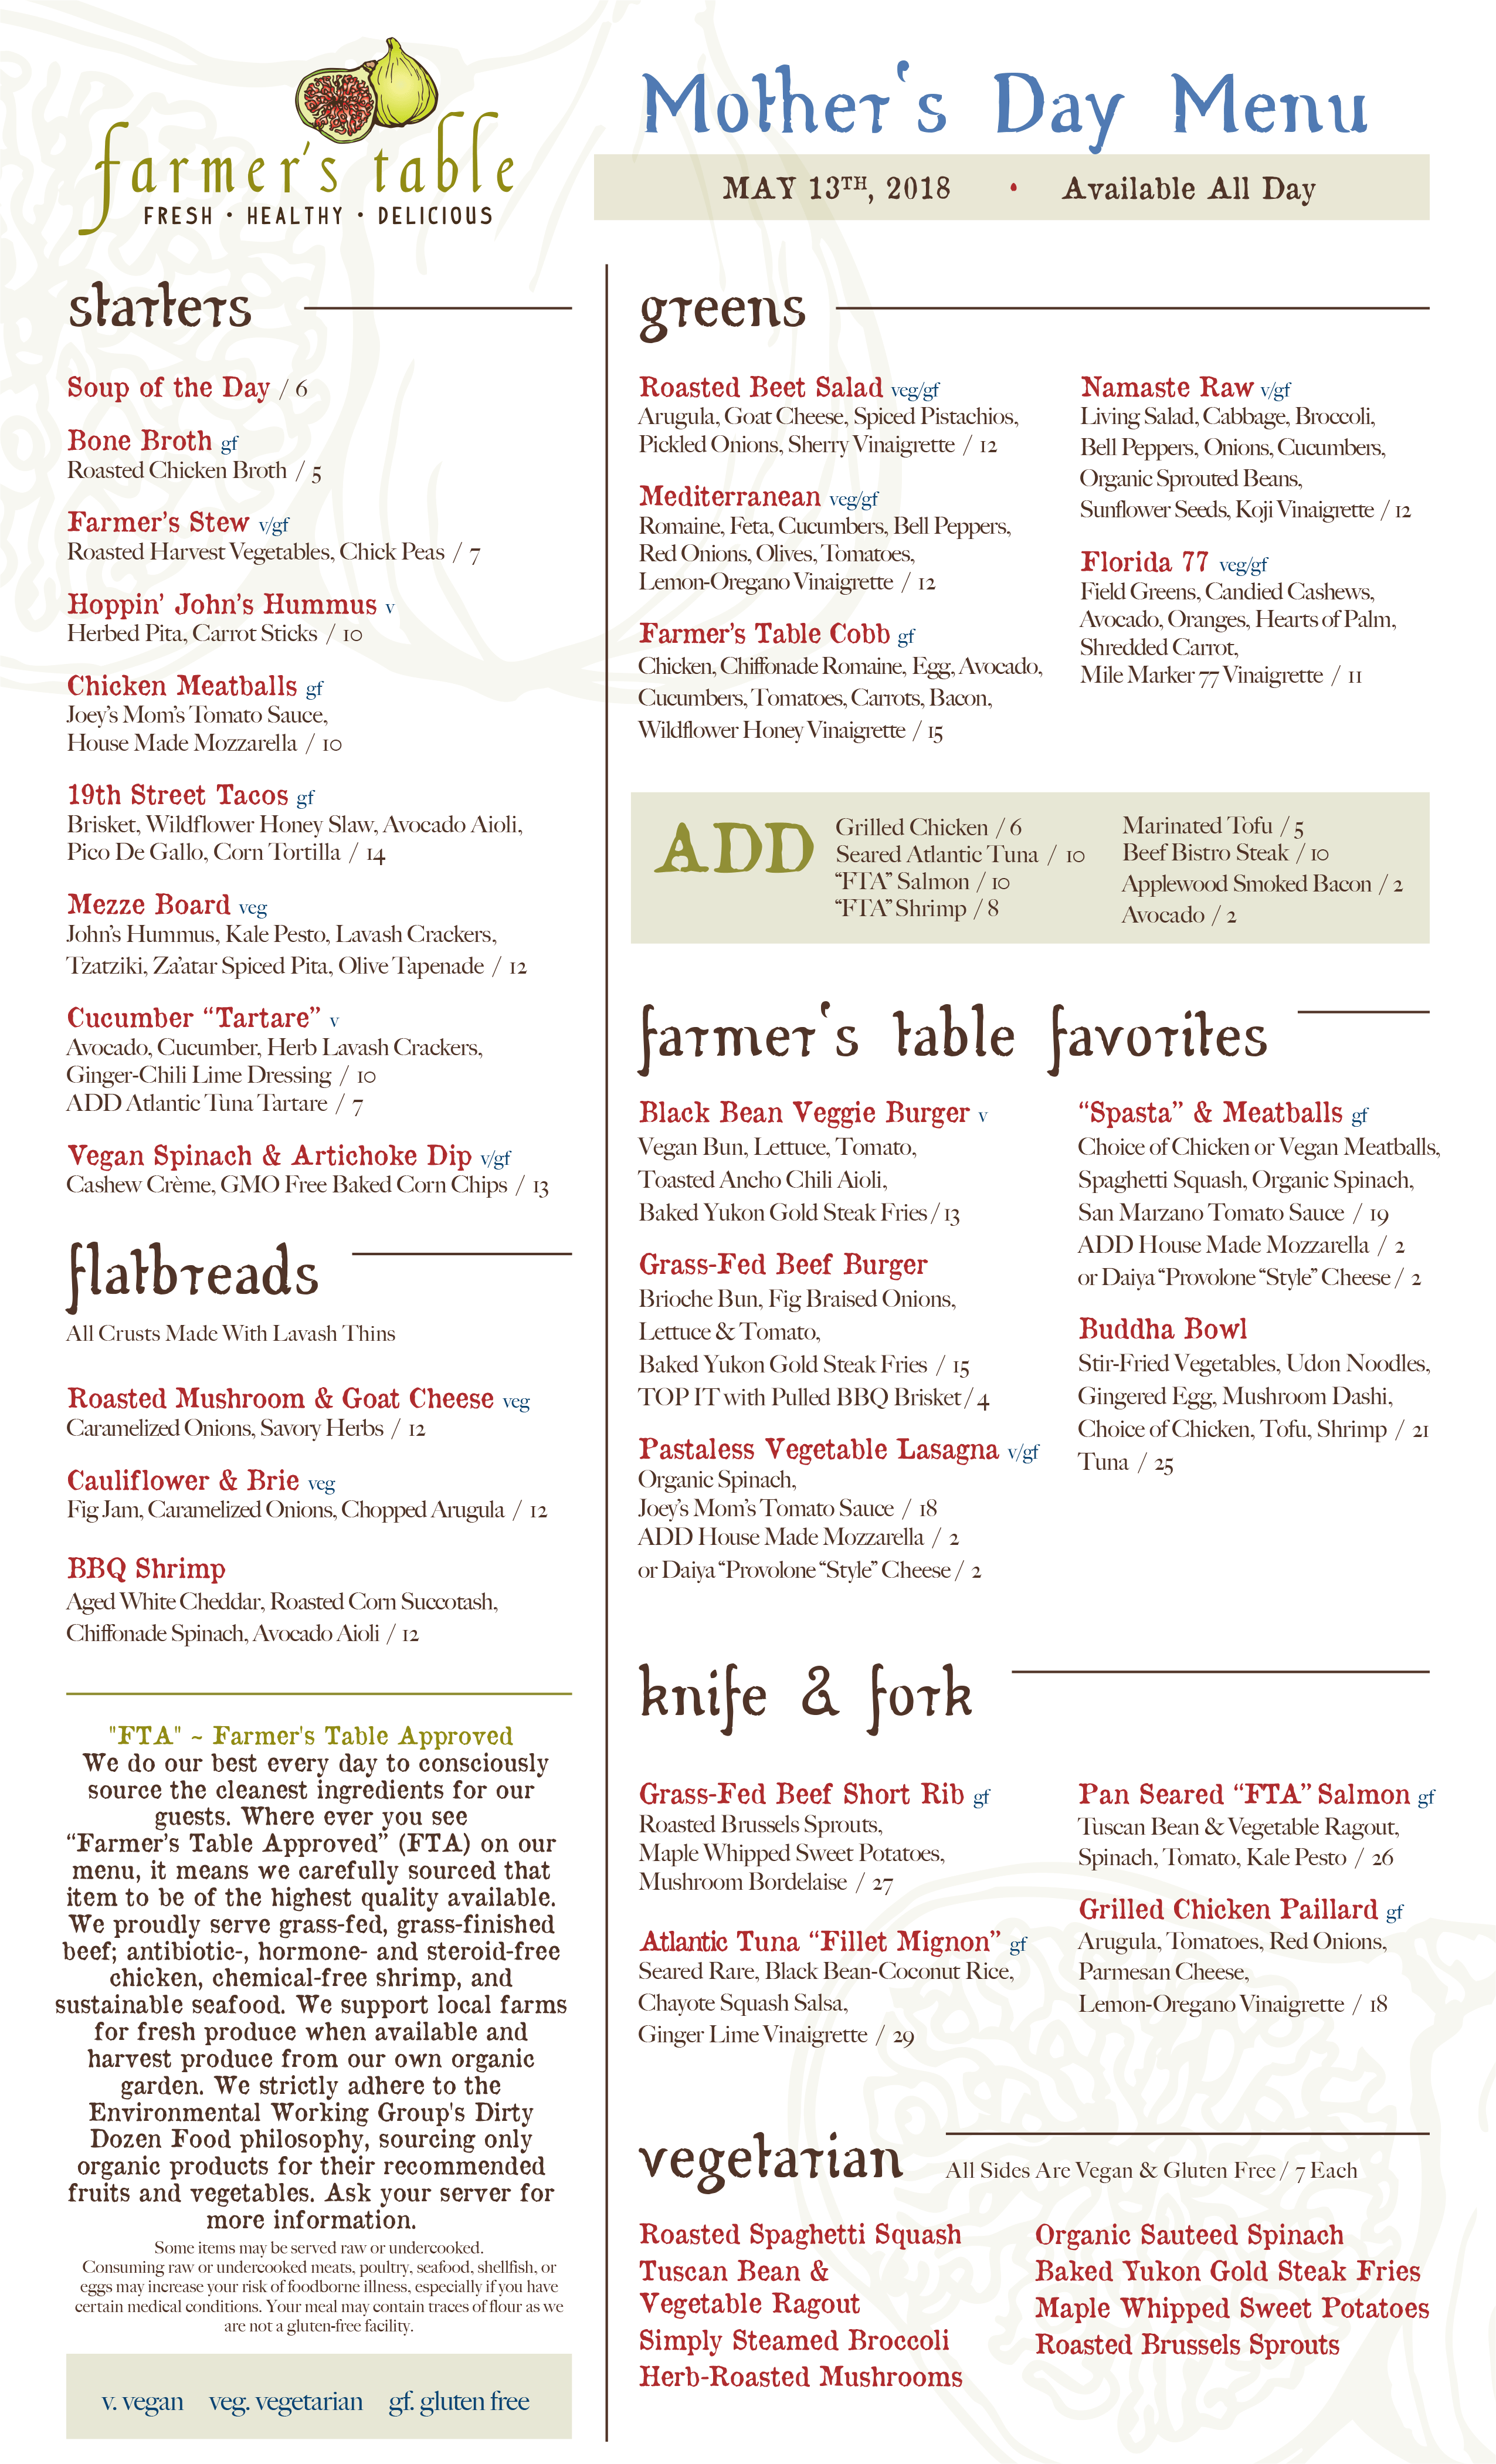 Mother's Day All Day Menu